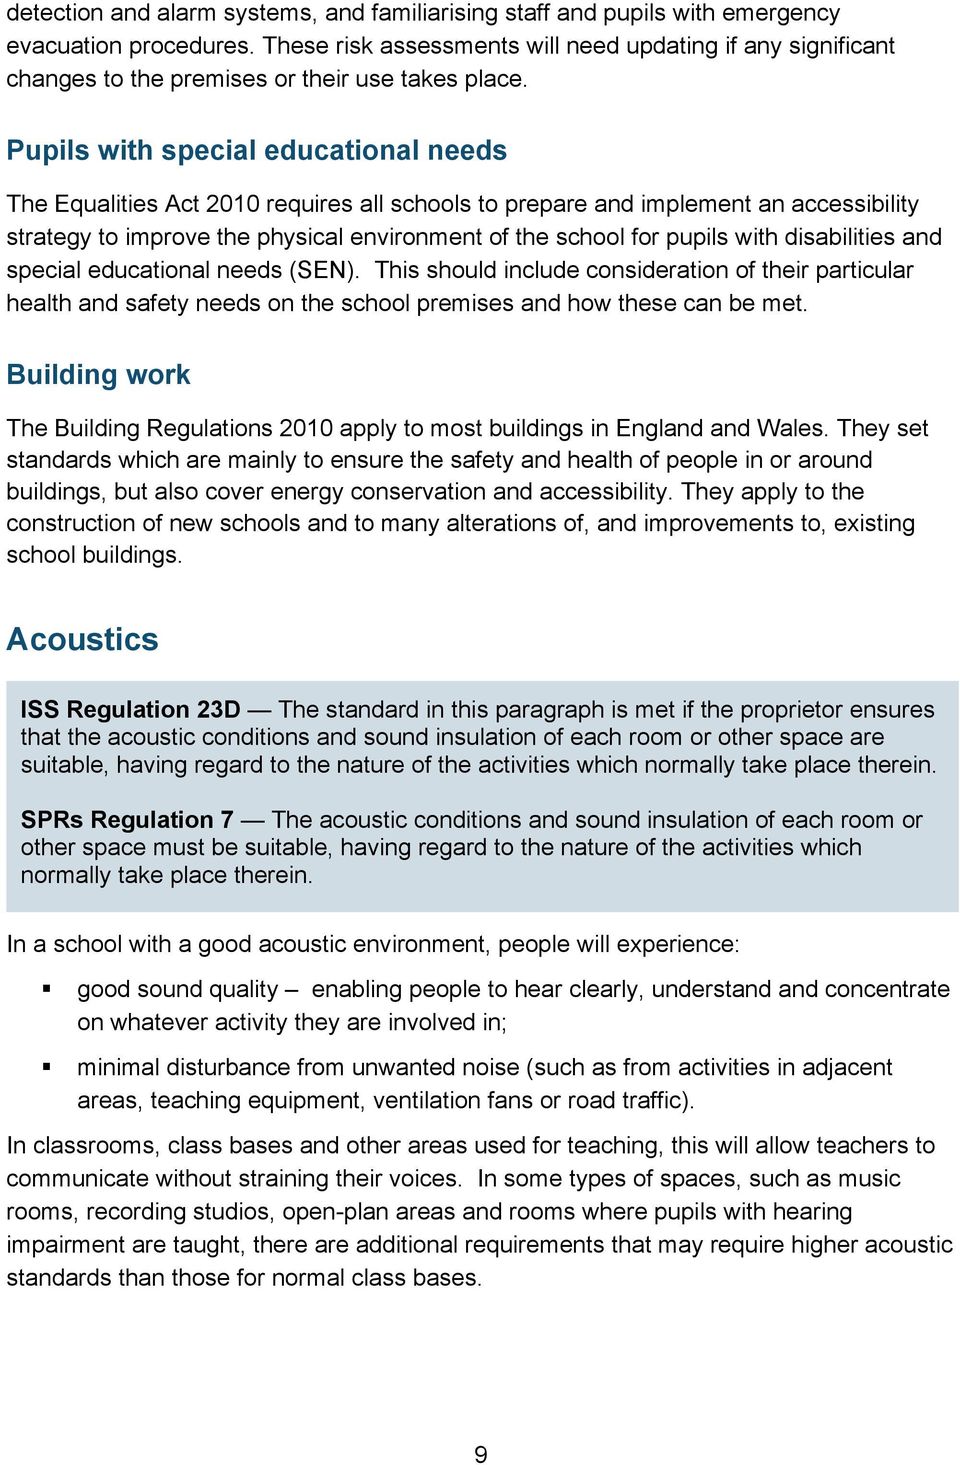 Pupils with special educational needs The Equalities Act 2010 requires all schools to prepare and implement an accessibility strategy to improve the physical environment of the school for pupils with